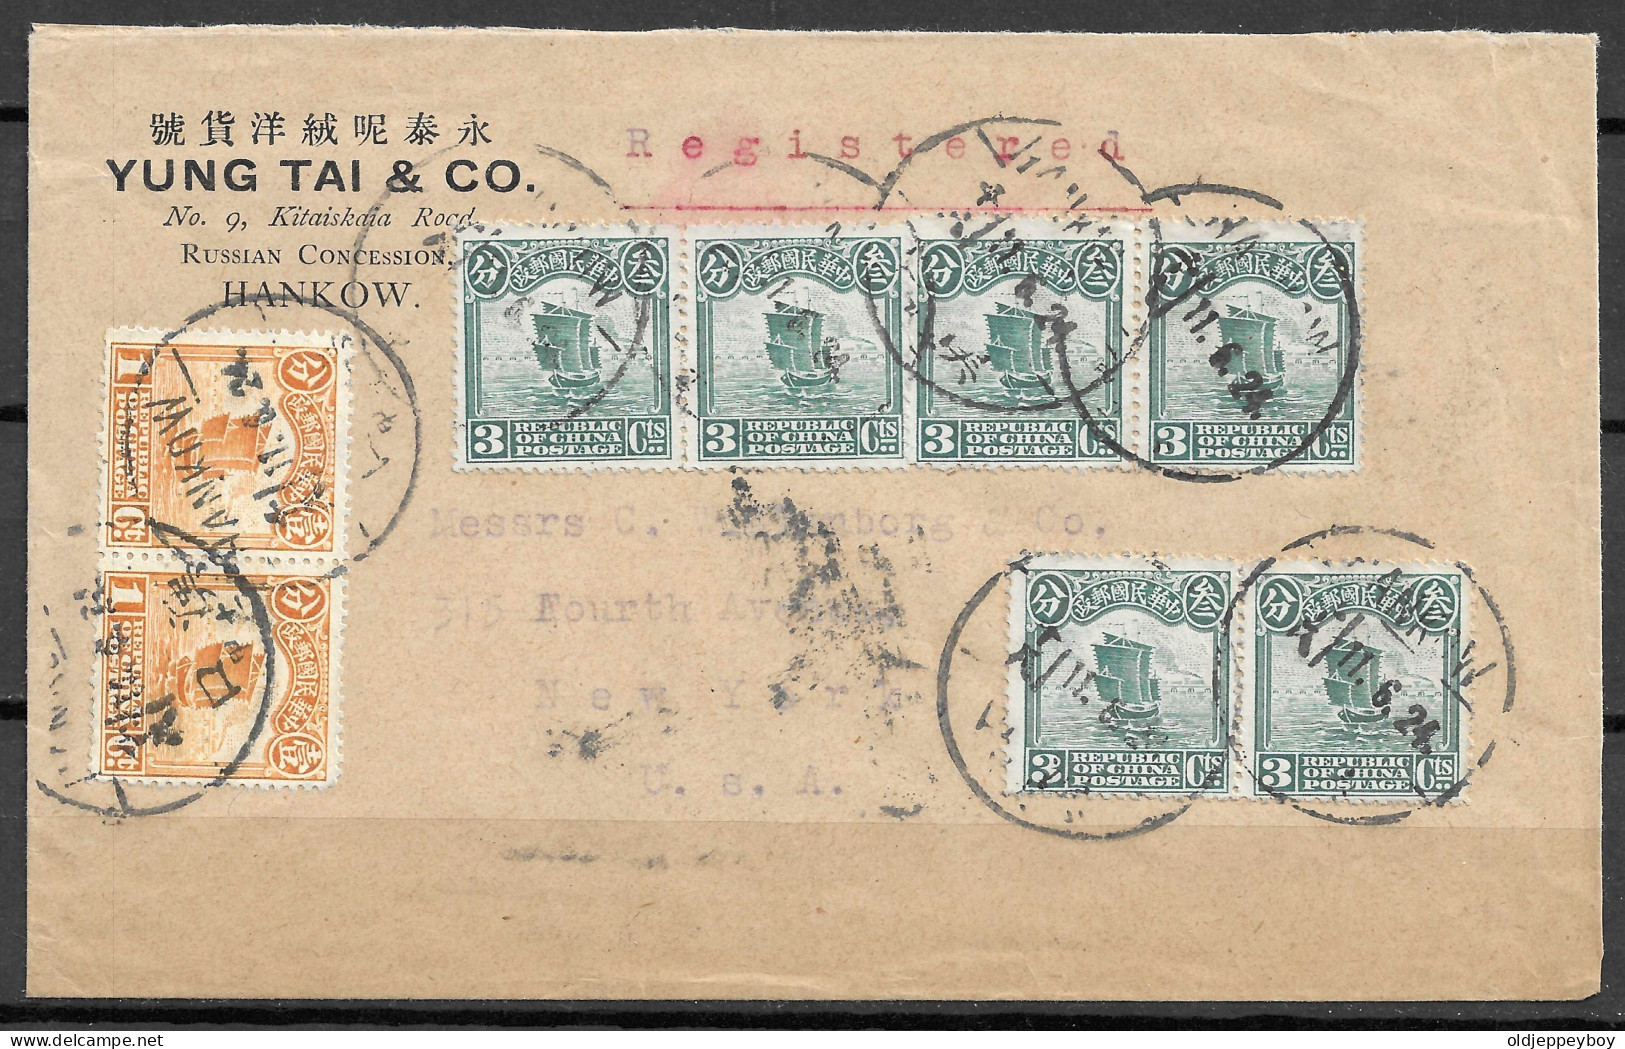 1924 CHINA HANKOW YUNG TAI & CO RUSSIAN CONCESSION REGISTERED COVER TO NEW YORK USA JUNKS SHIPS - 1912-1949 Republic